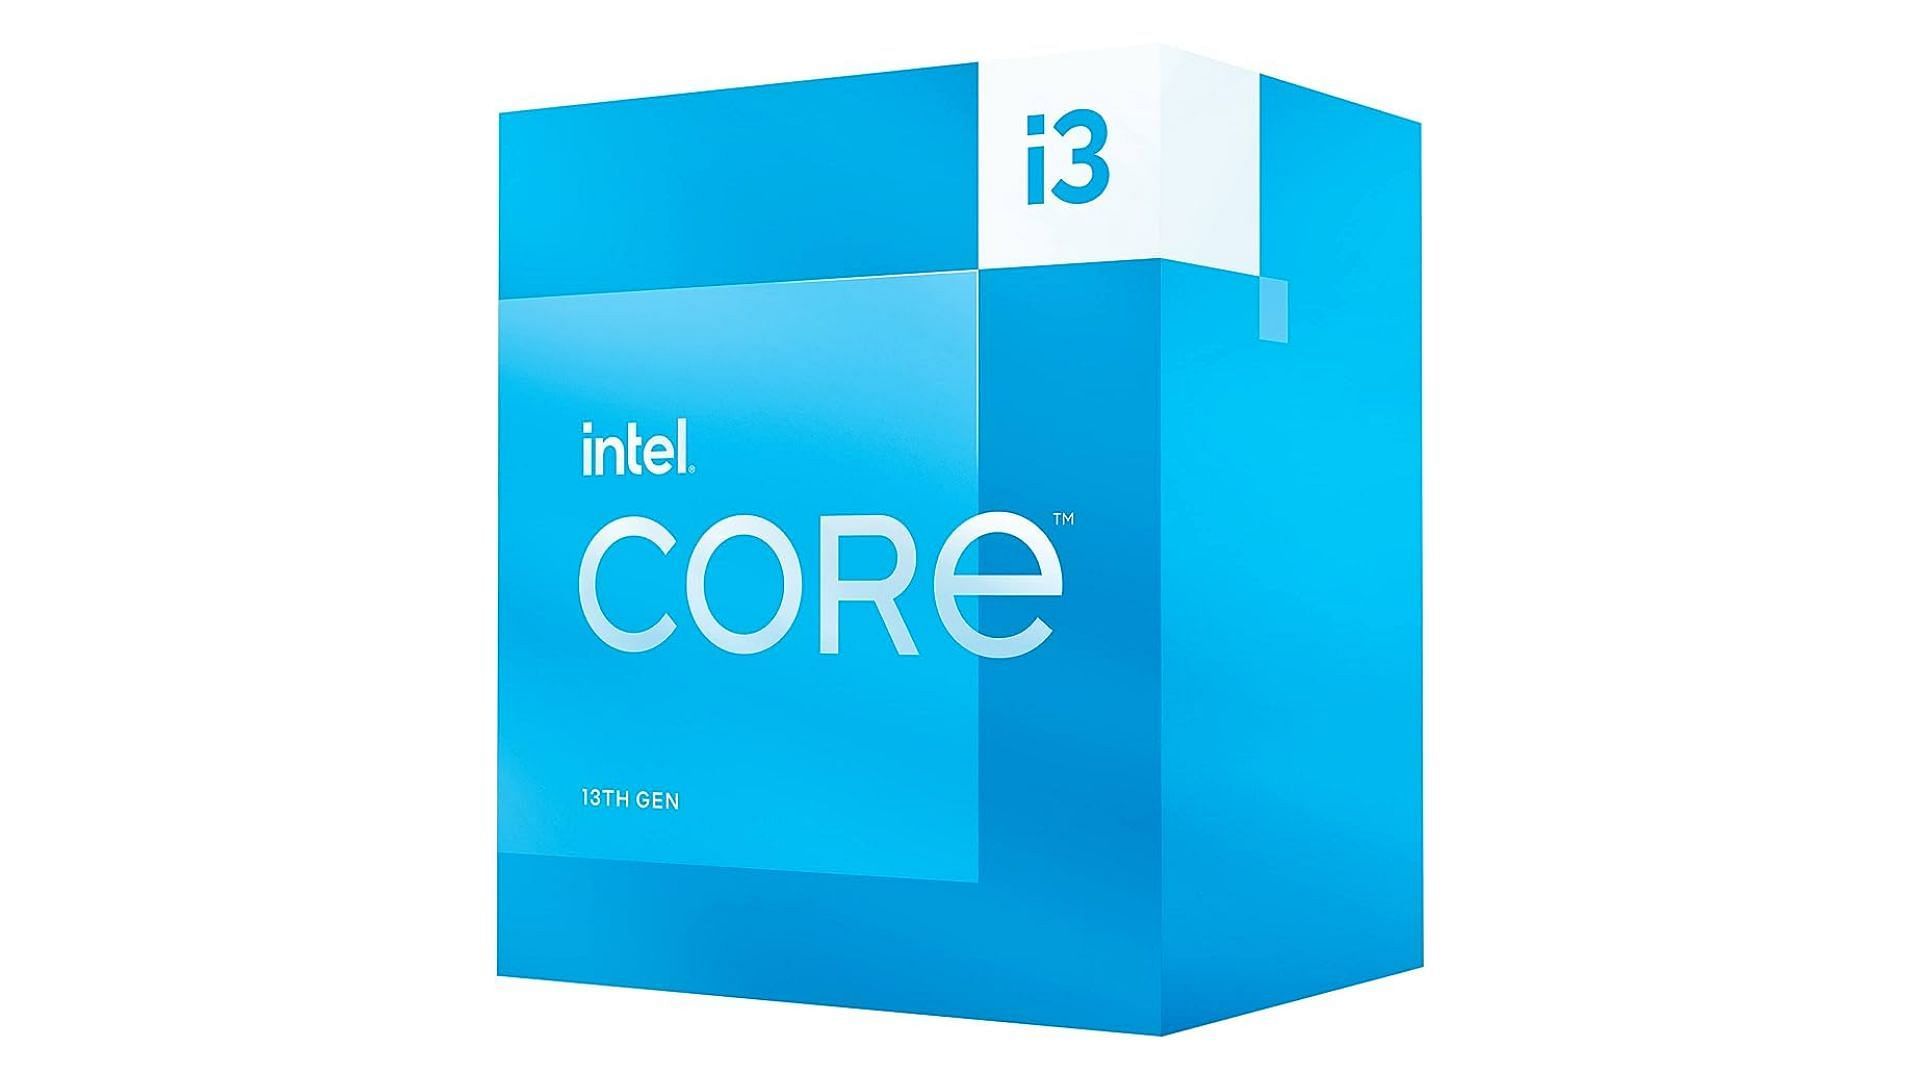 The Intel Core i3-13100 is a popular quad-core CPU for budget gaming (Image via Intel)